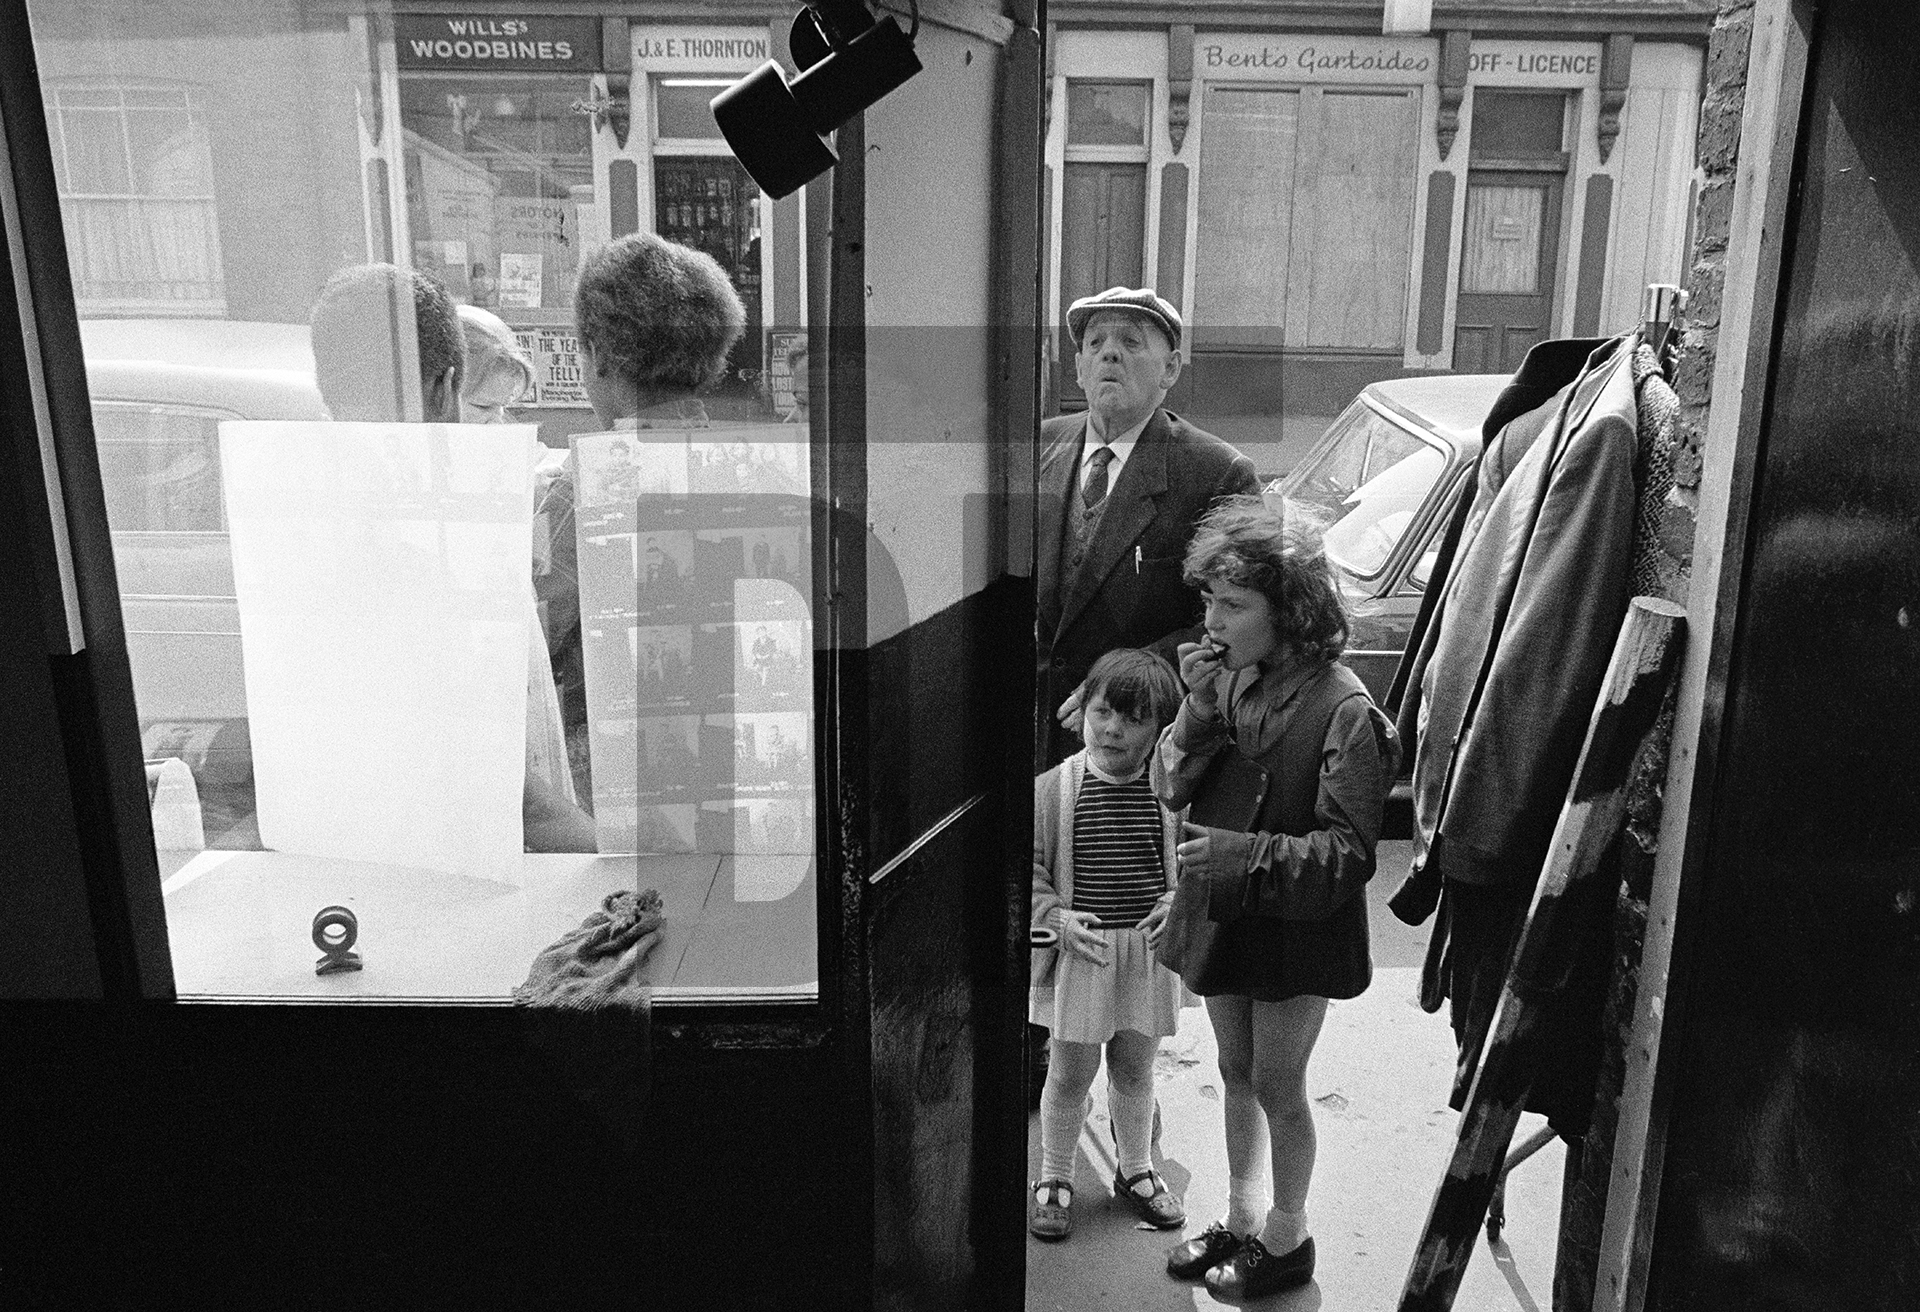 Watching as new pictures are posted in the window of The Shop on Greame Street, Moss Side, Manchester. February-April 1972 by Daniel Meadows